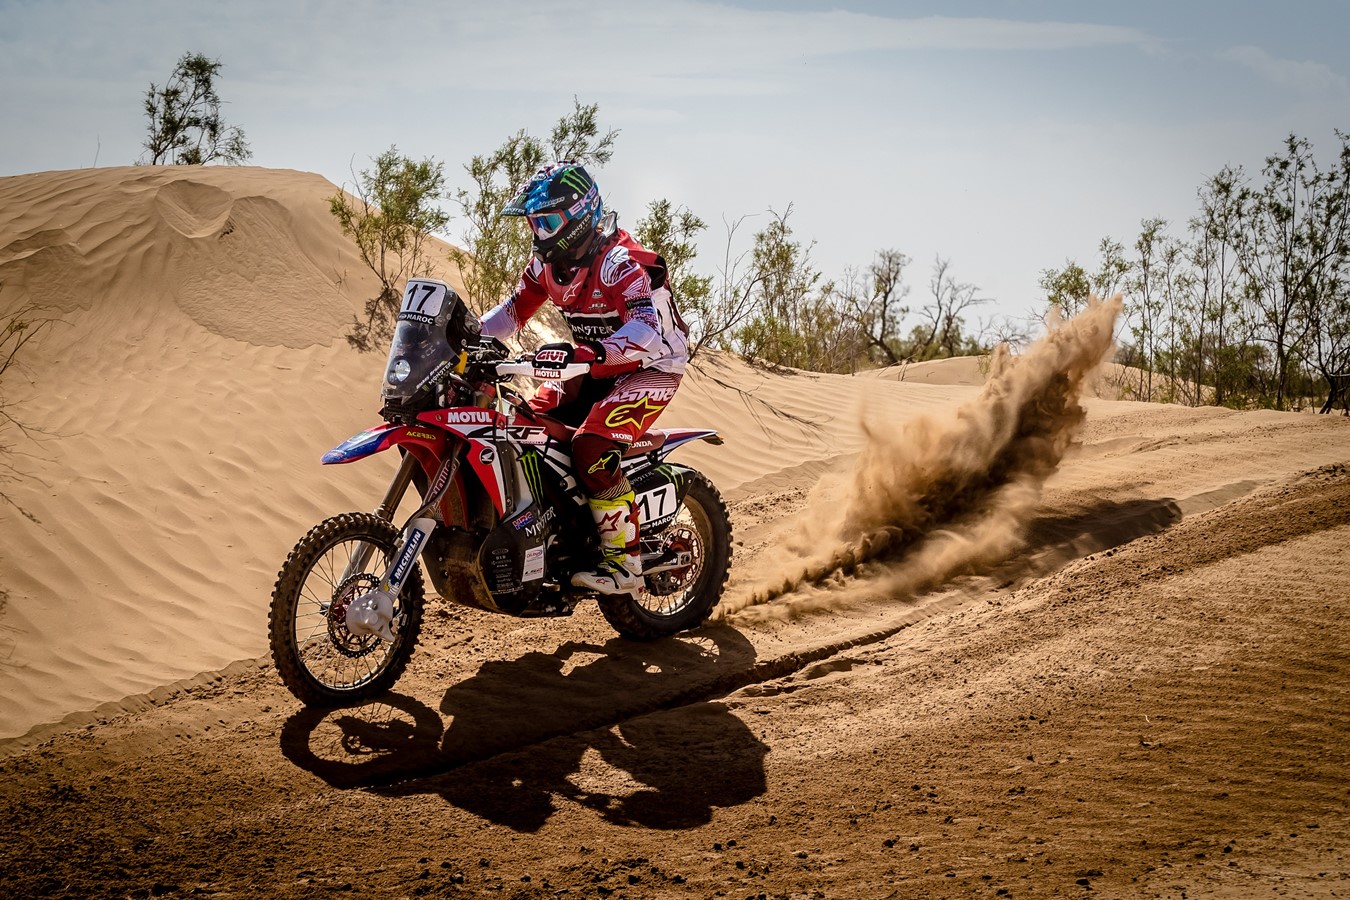 Monster Energy Honda Team will fight to the end for a win in the Morocco Rally